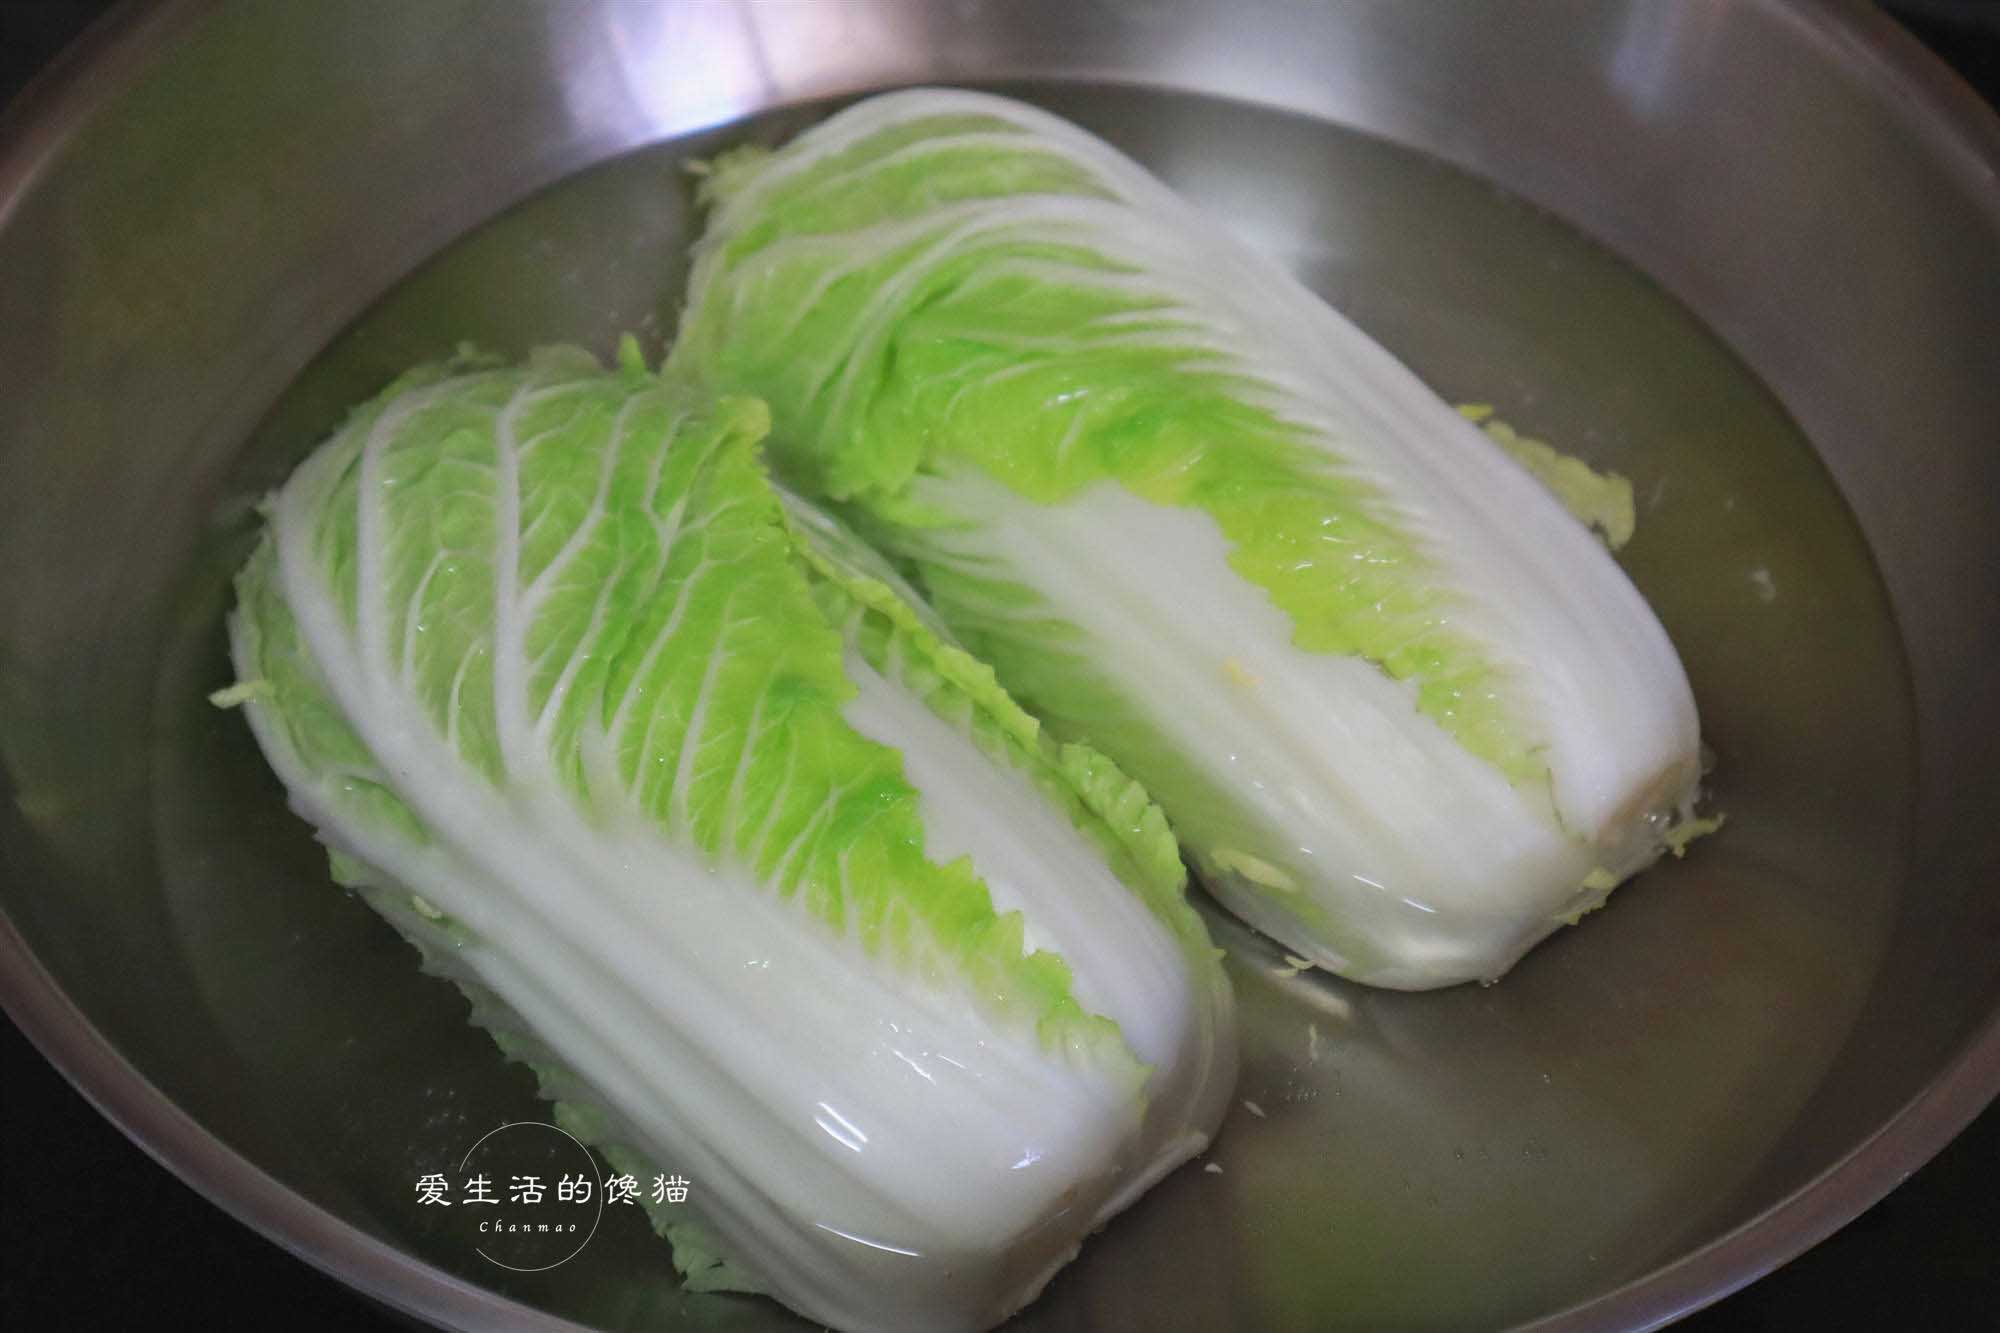 How to make silage cabbage without salt, no scum, delicious and good for health - 3